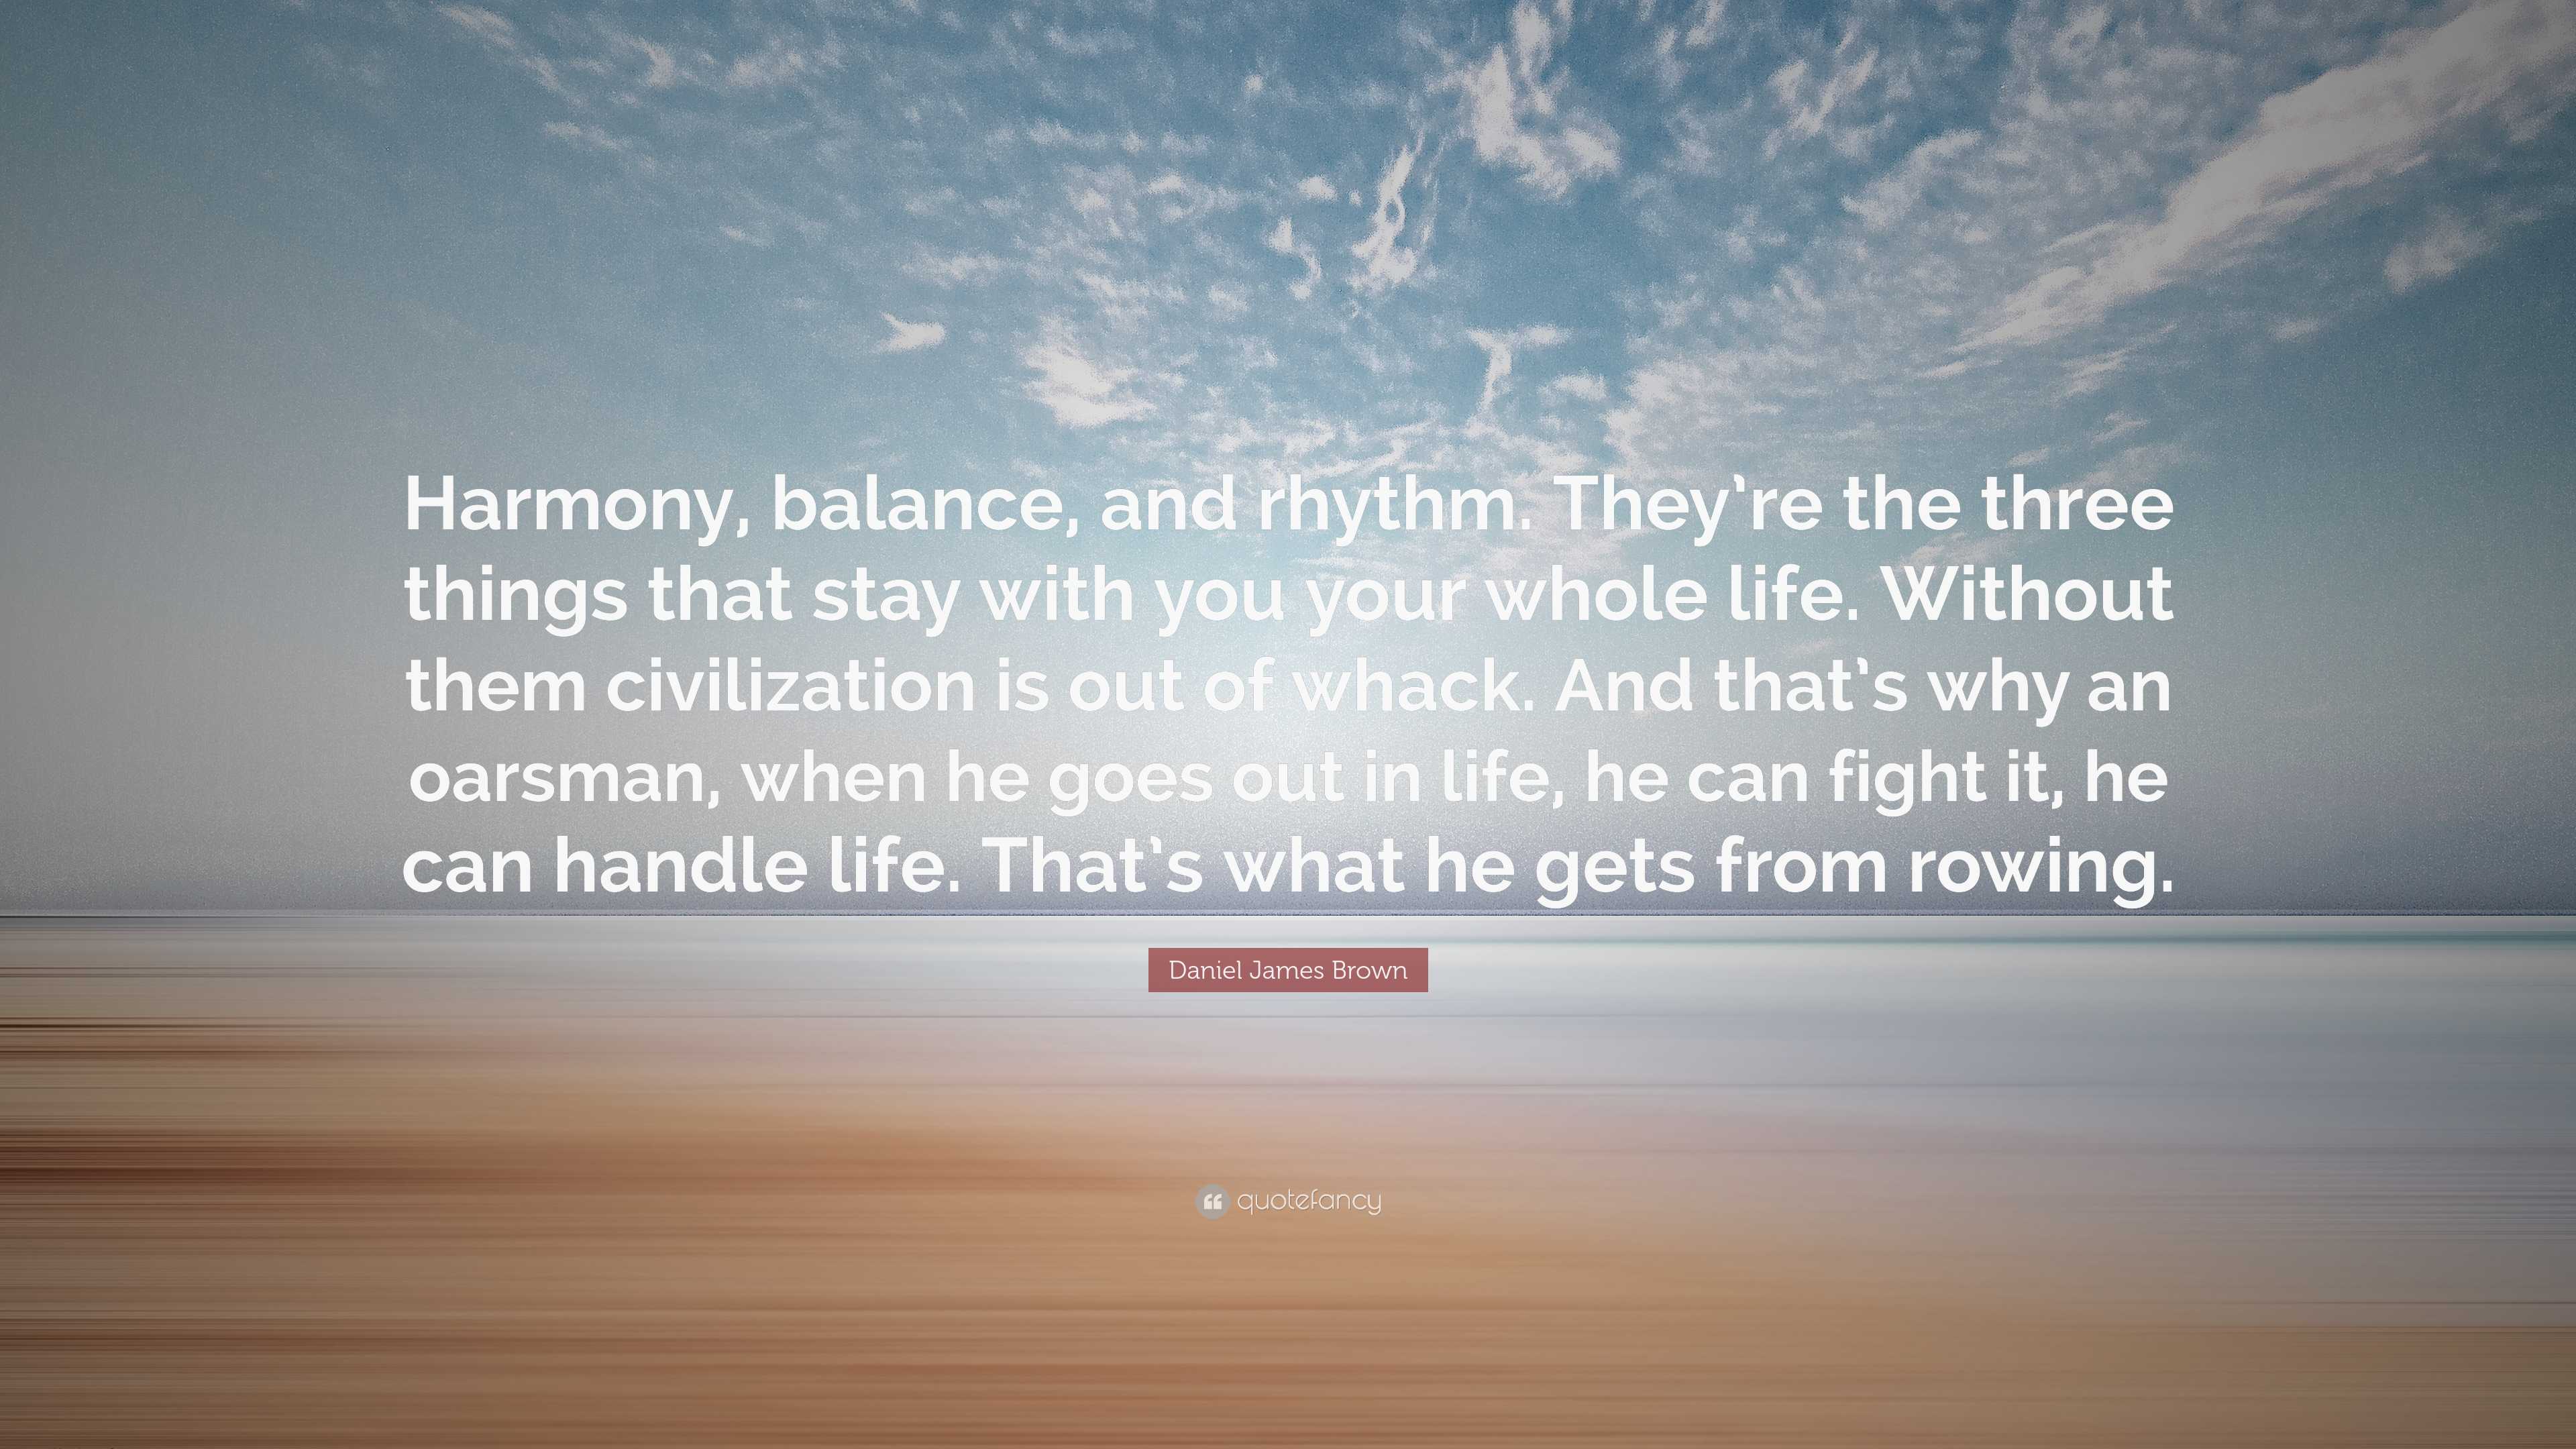 Daniel James Brown Quote: “Harmony, balance, and rhythm. They're